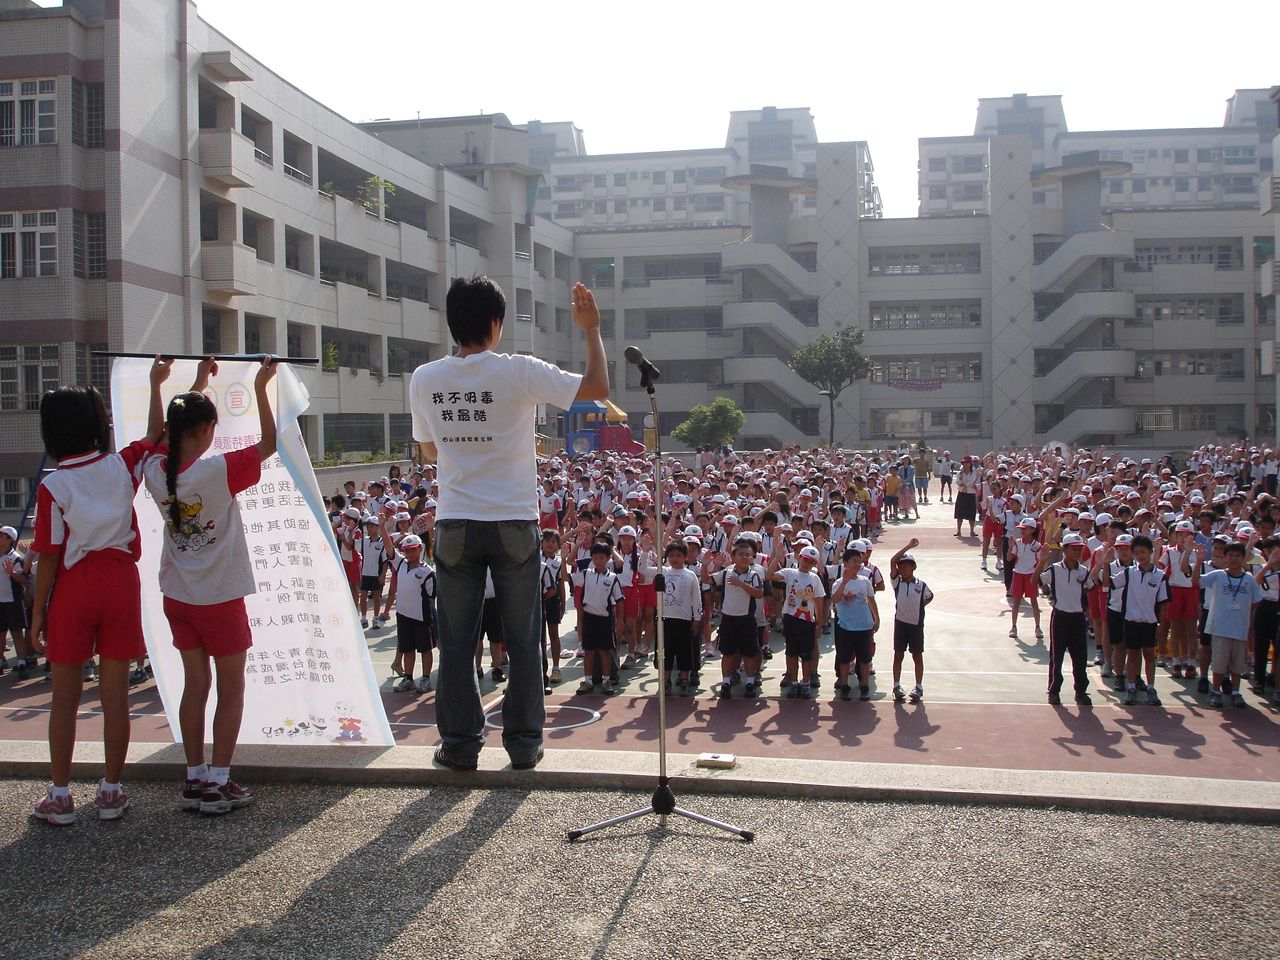 As part of the Scientology drug education initiative in Taiwan, volunteers provide drug education to children and have them pledge to live drug-free.